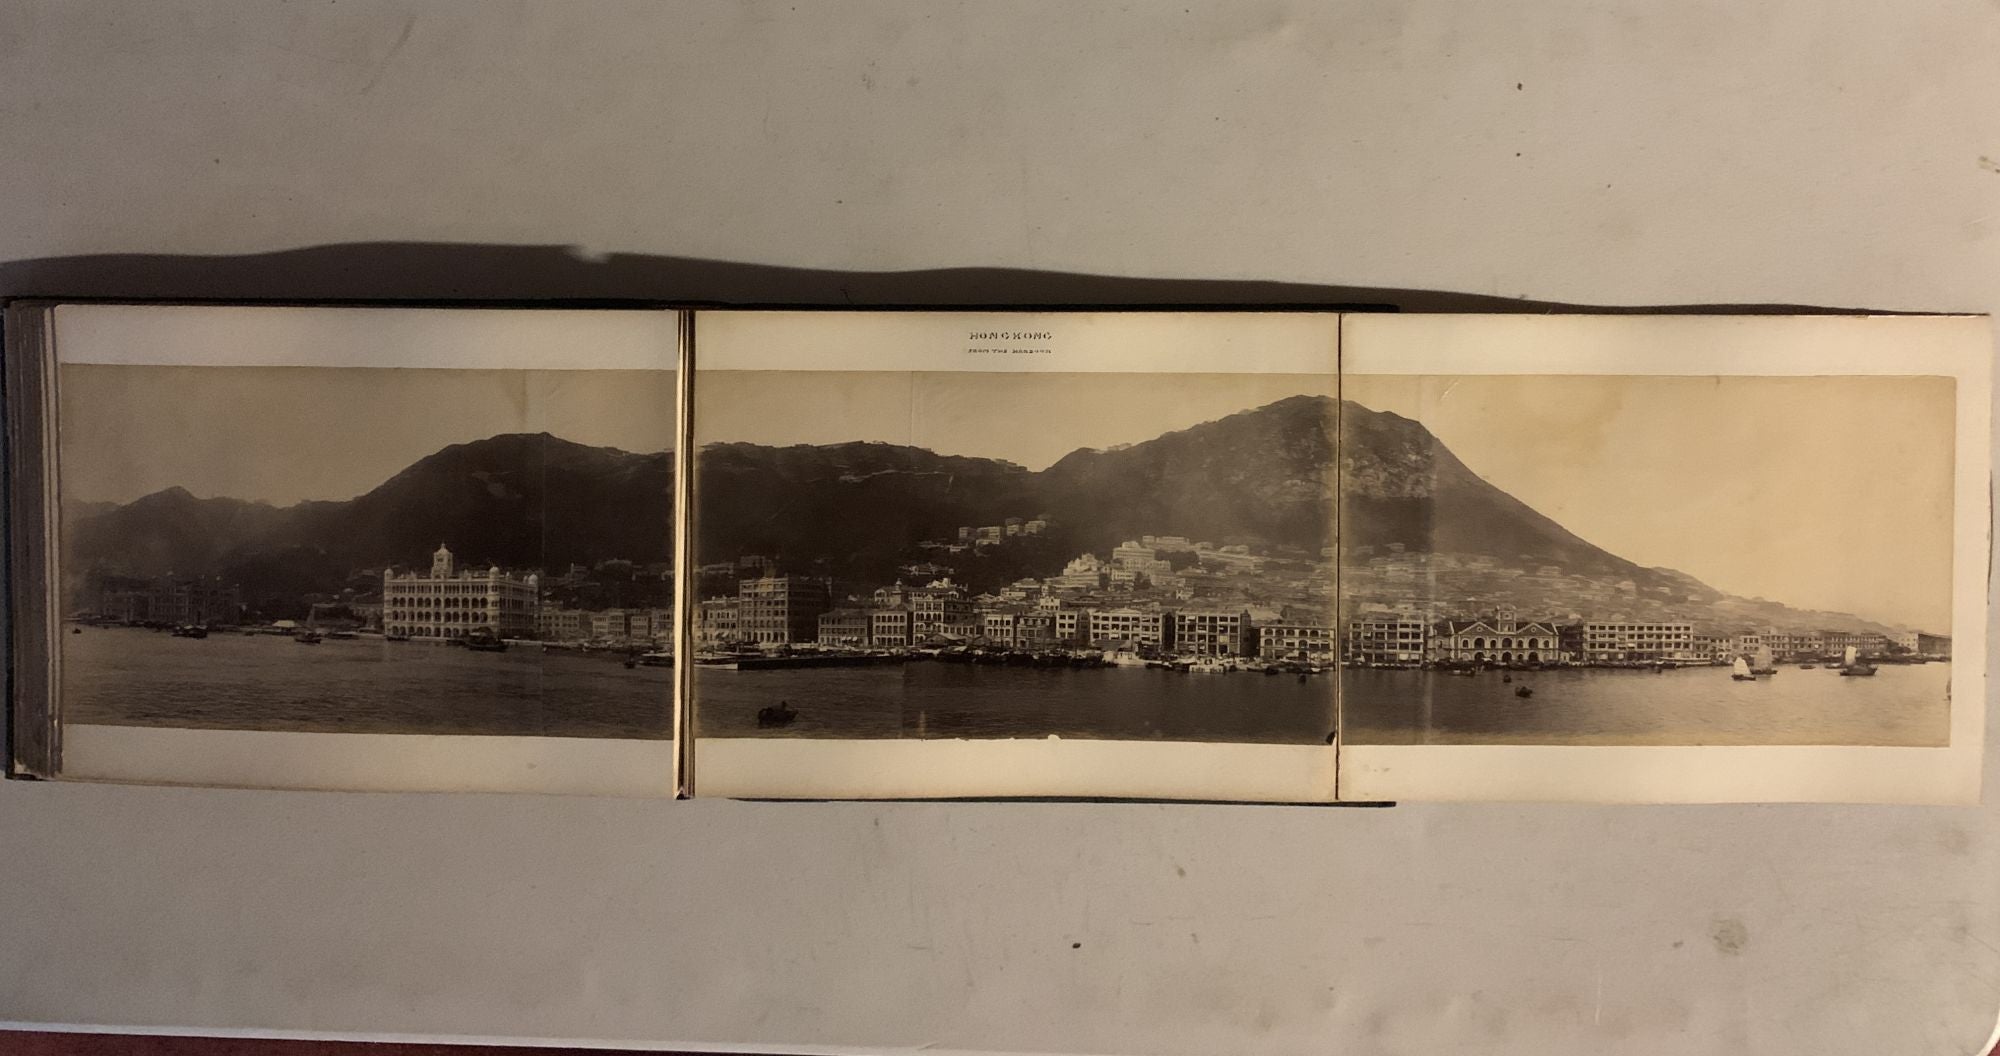 Turner, Jack (?) - Photo Album Boxer Rebellion China; Panoramas of Shanghai and Hong Kong; (with a Wee Inexplicable Bit of Switzerland, Thrown in)